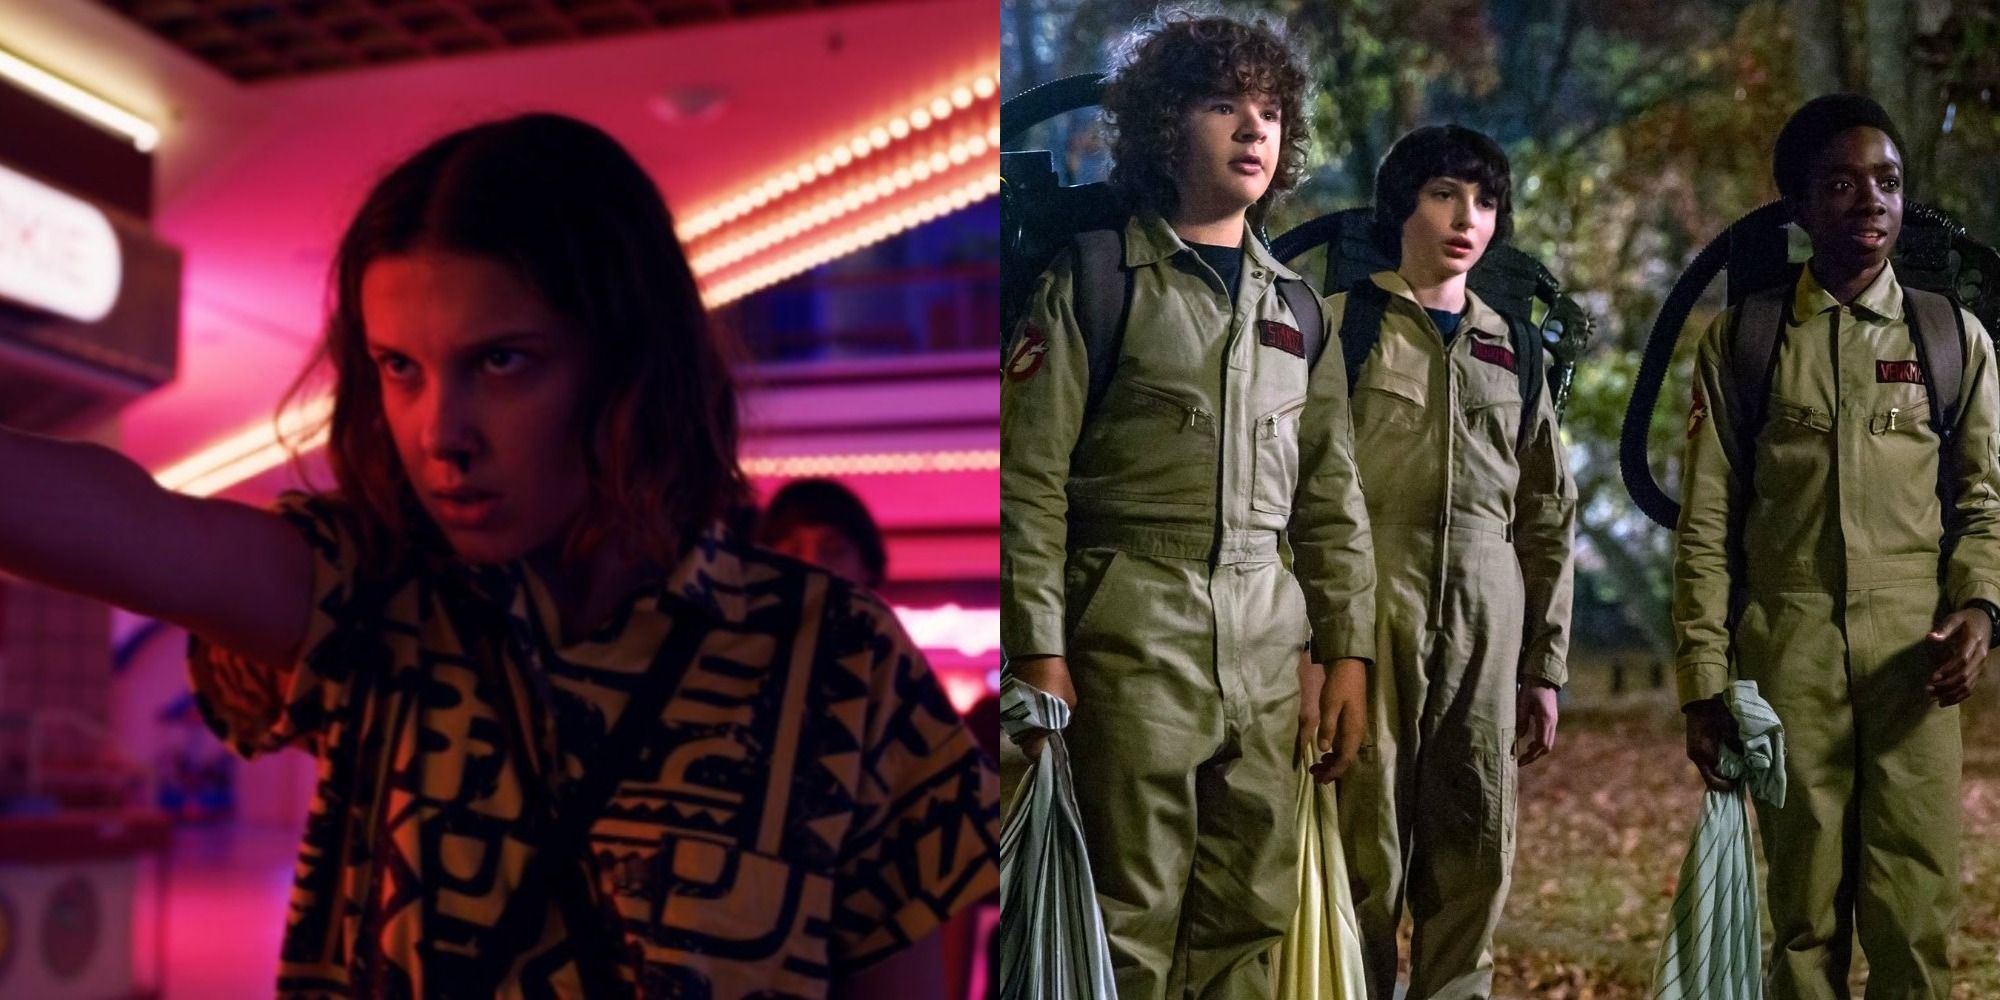 Split image of Eleven using her powers and the boys dressed as Ghostbusters in Stranger Things